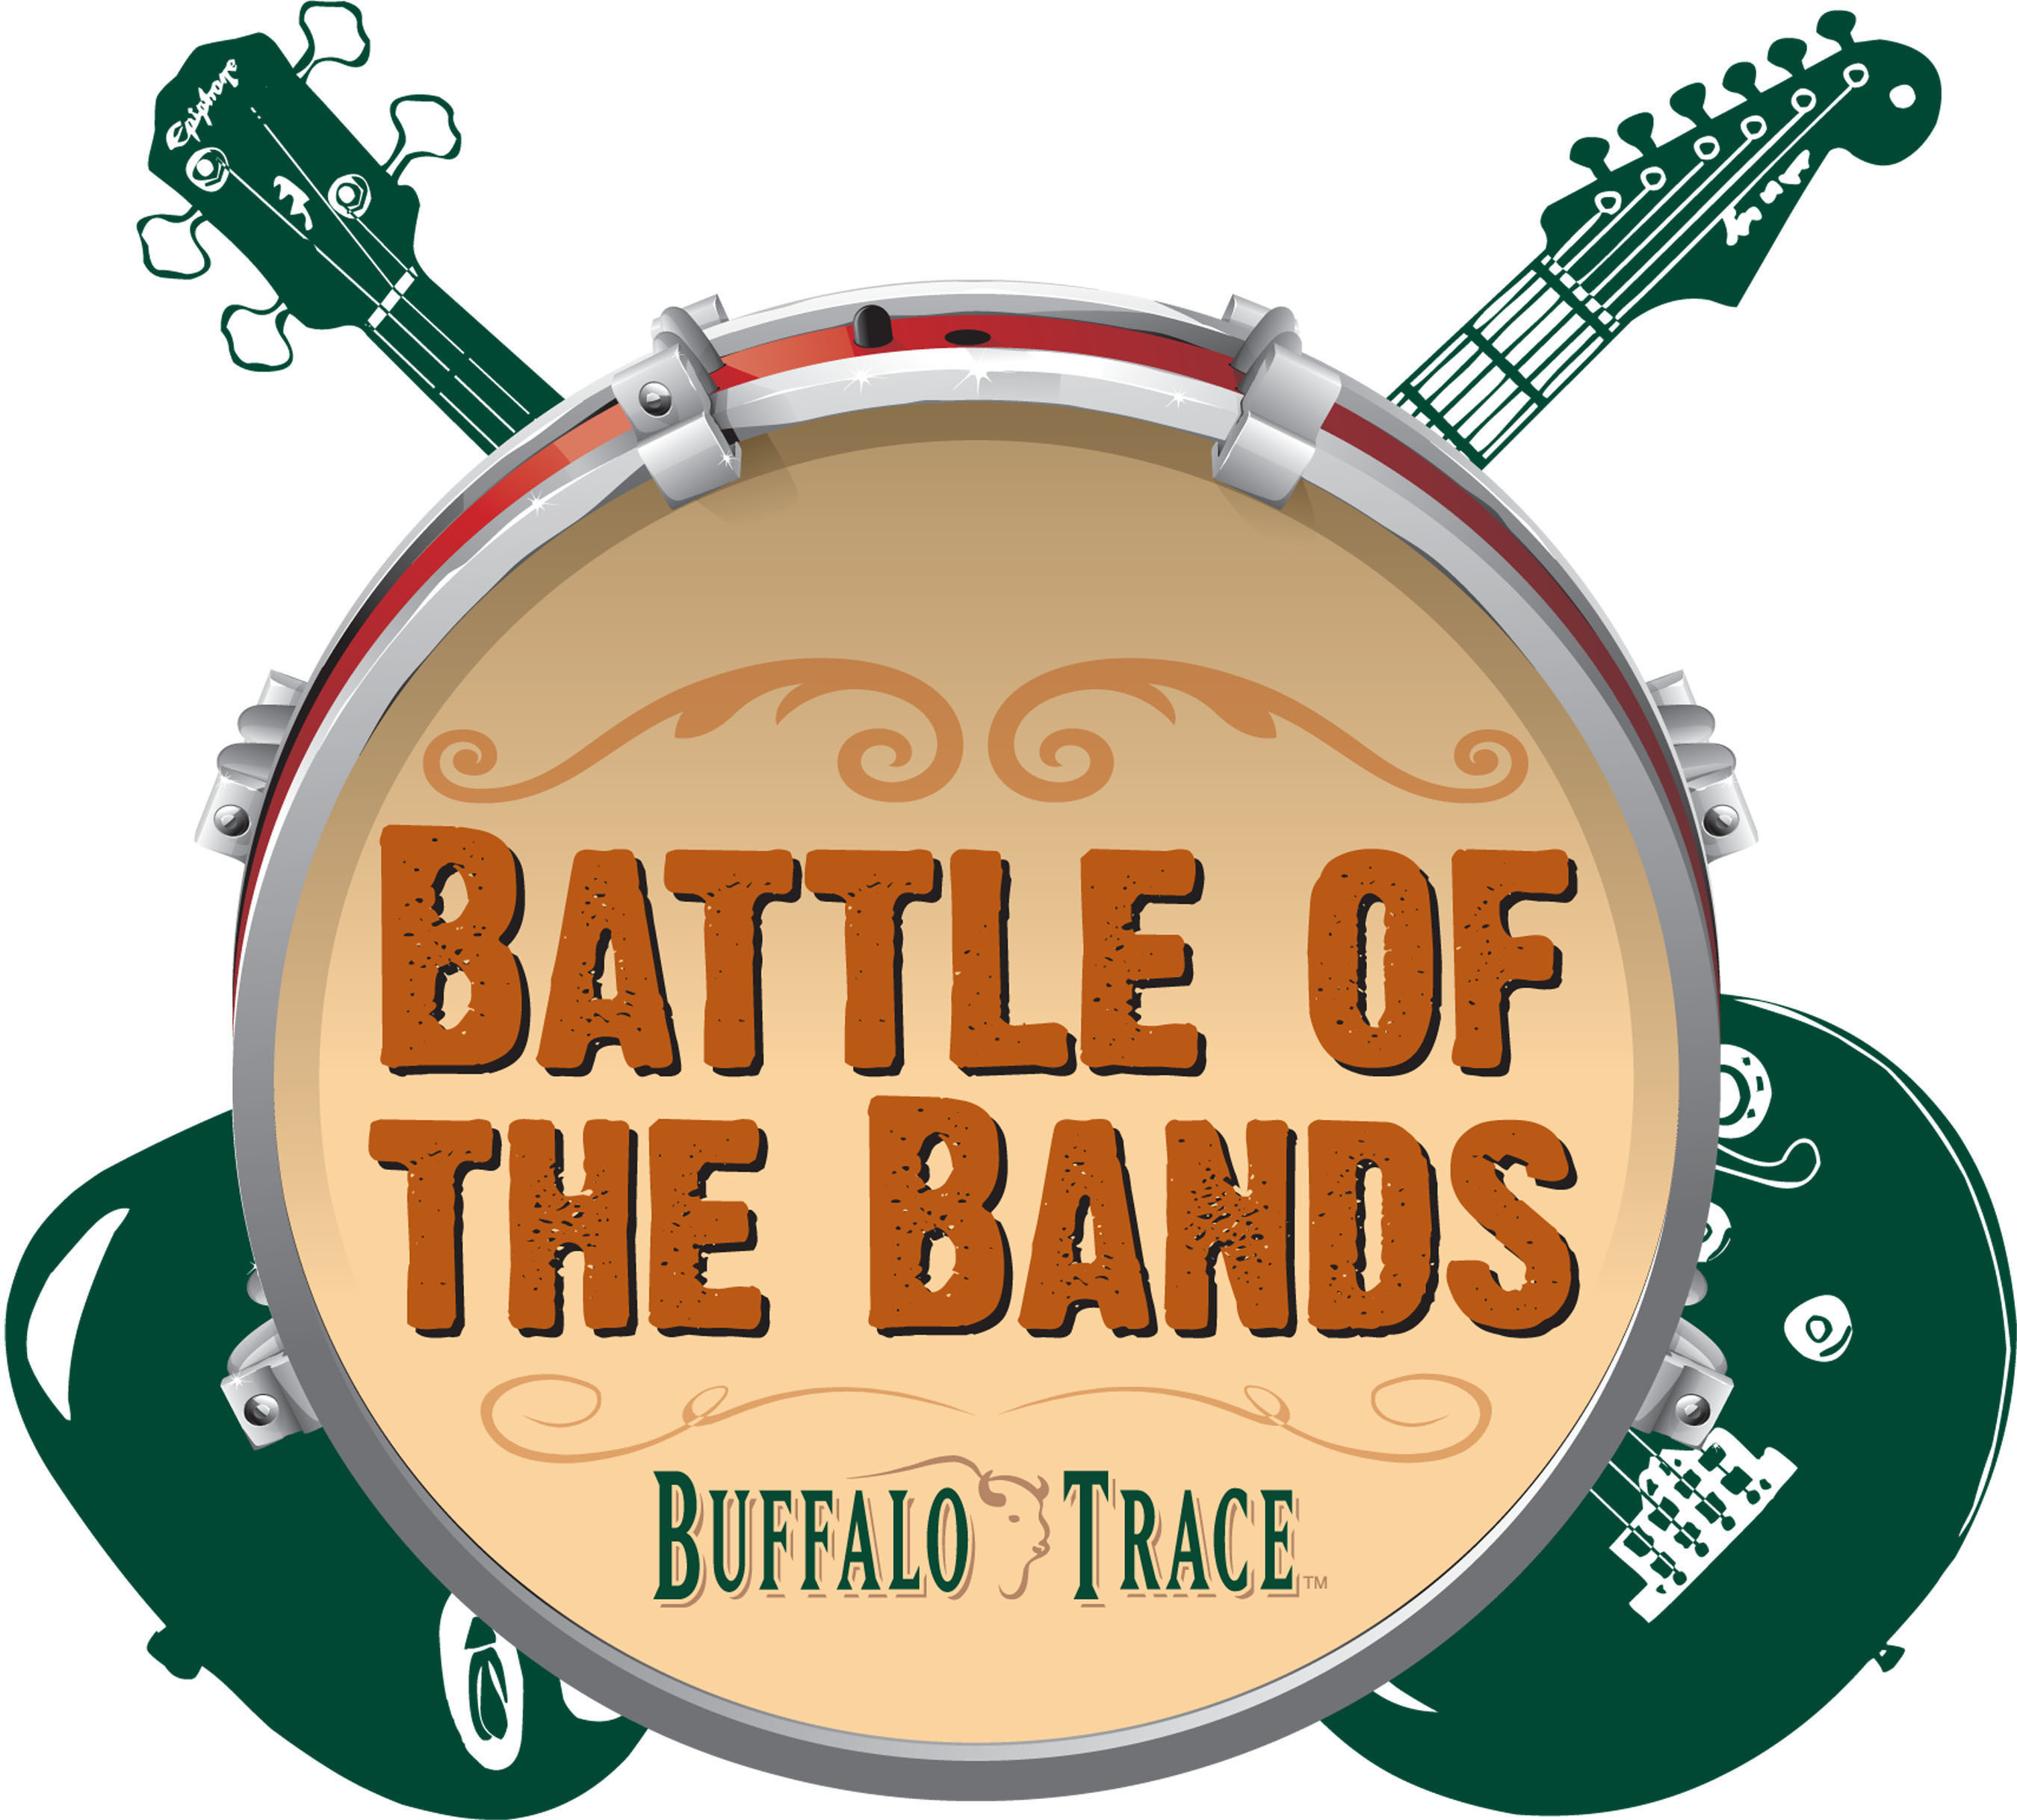 Buffalo Trace Bourbon Announces Battle of the Bands 2014 with a $10,000 Grand Prize Winner. See www.buffalotracesaloon.com for details. (PRNewsFoto/Buffalo Trace Distillery) (PRNewsFoto/BUFFALO TRACE DISTILLERY)